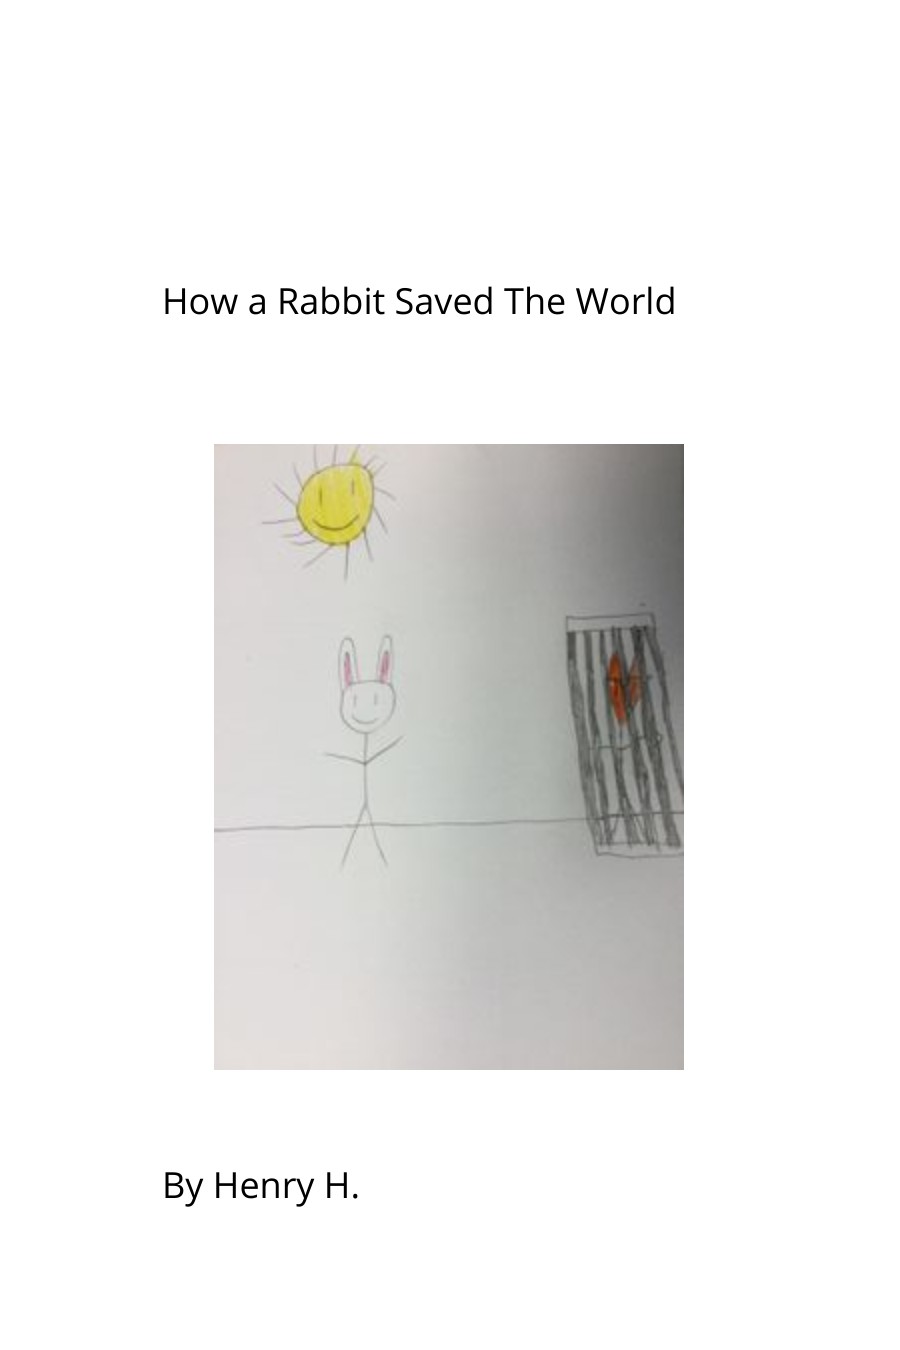 How A Rabbit Saved The World by Henry H.